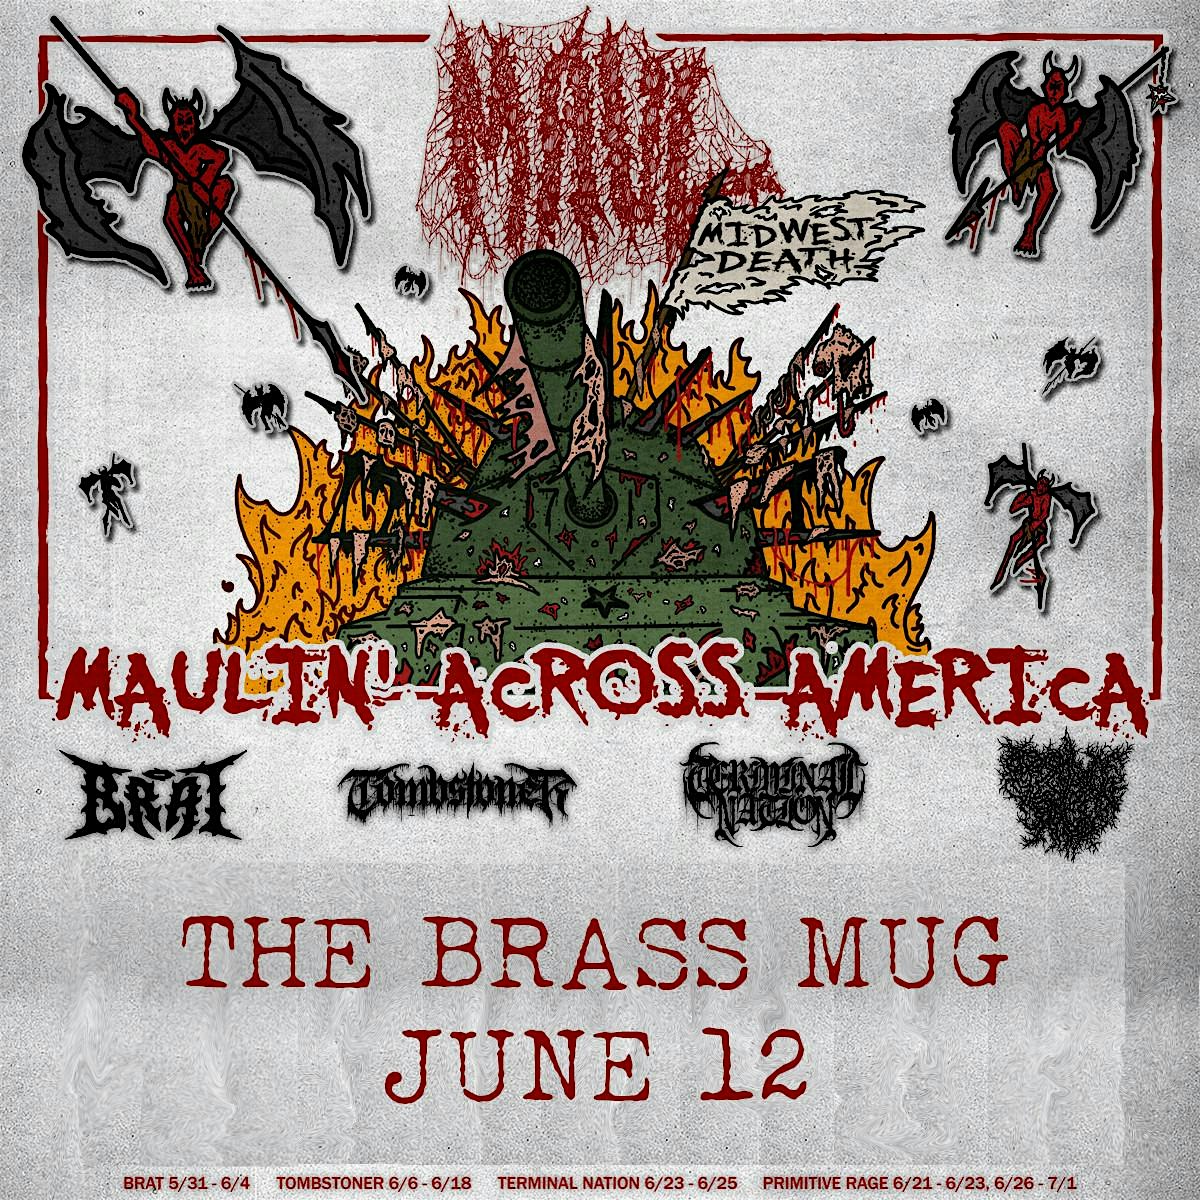 Maul, Tombstoner, Corrupted Saint, and Voidrium in Tampa at the Brass Mug